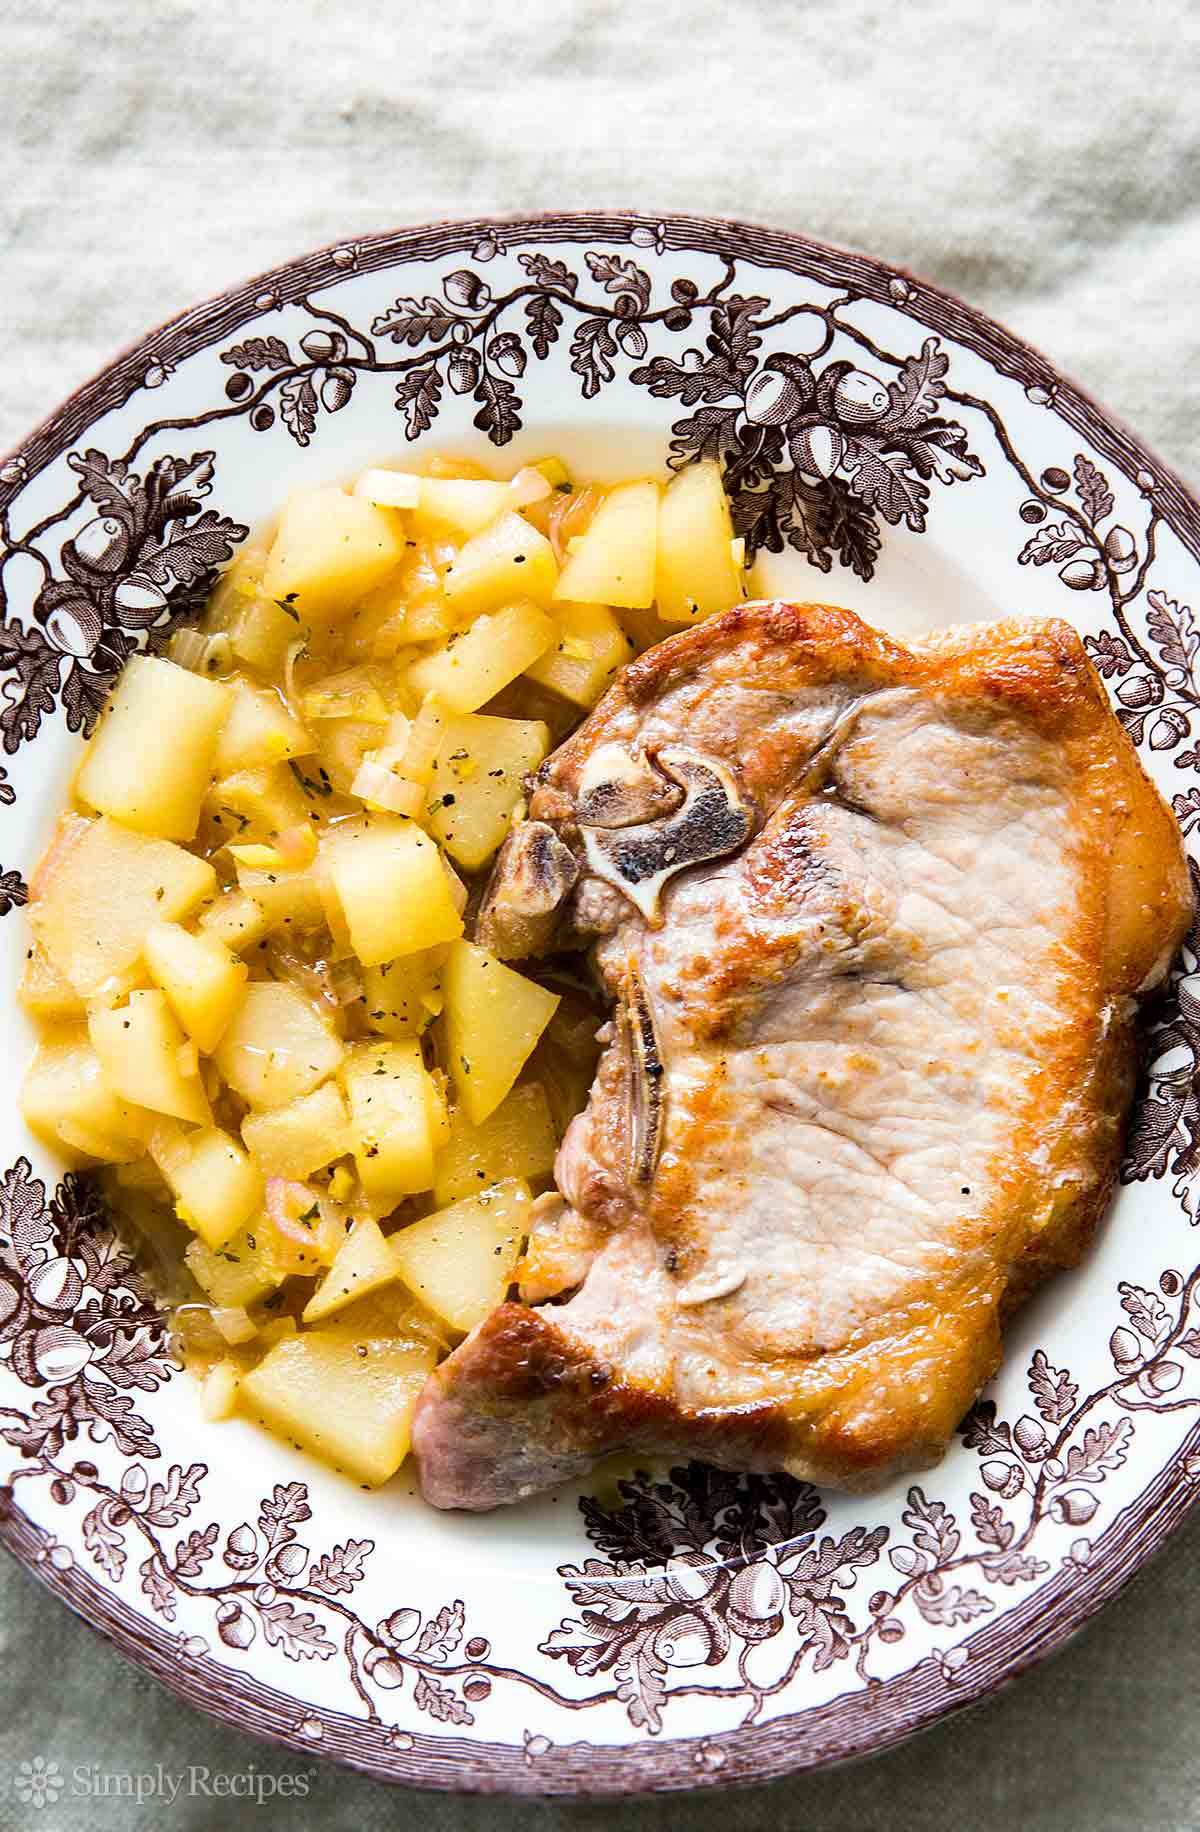 Recipes With Pork Chops
 Pork Chops with Ginger Pear Sauce Recipe